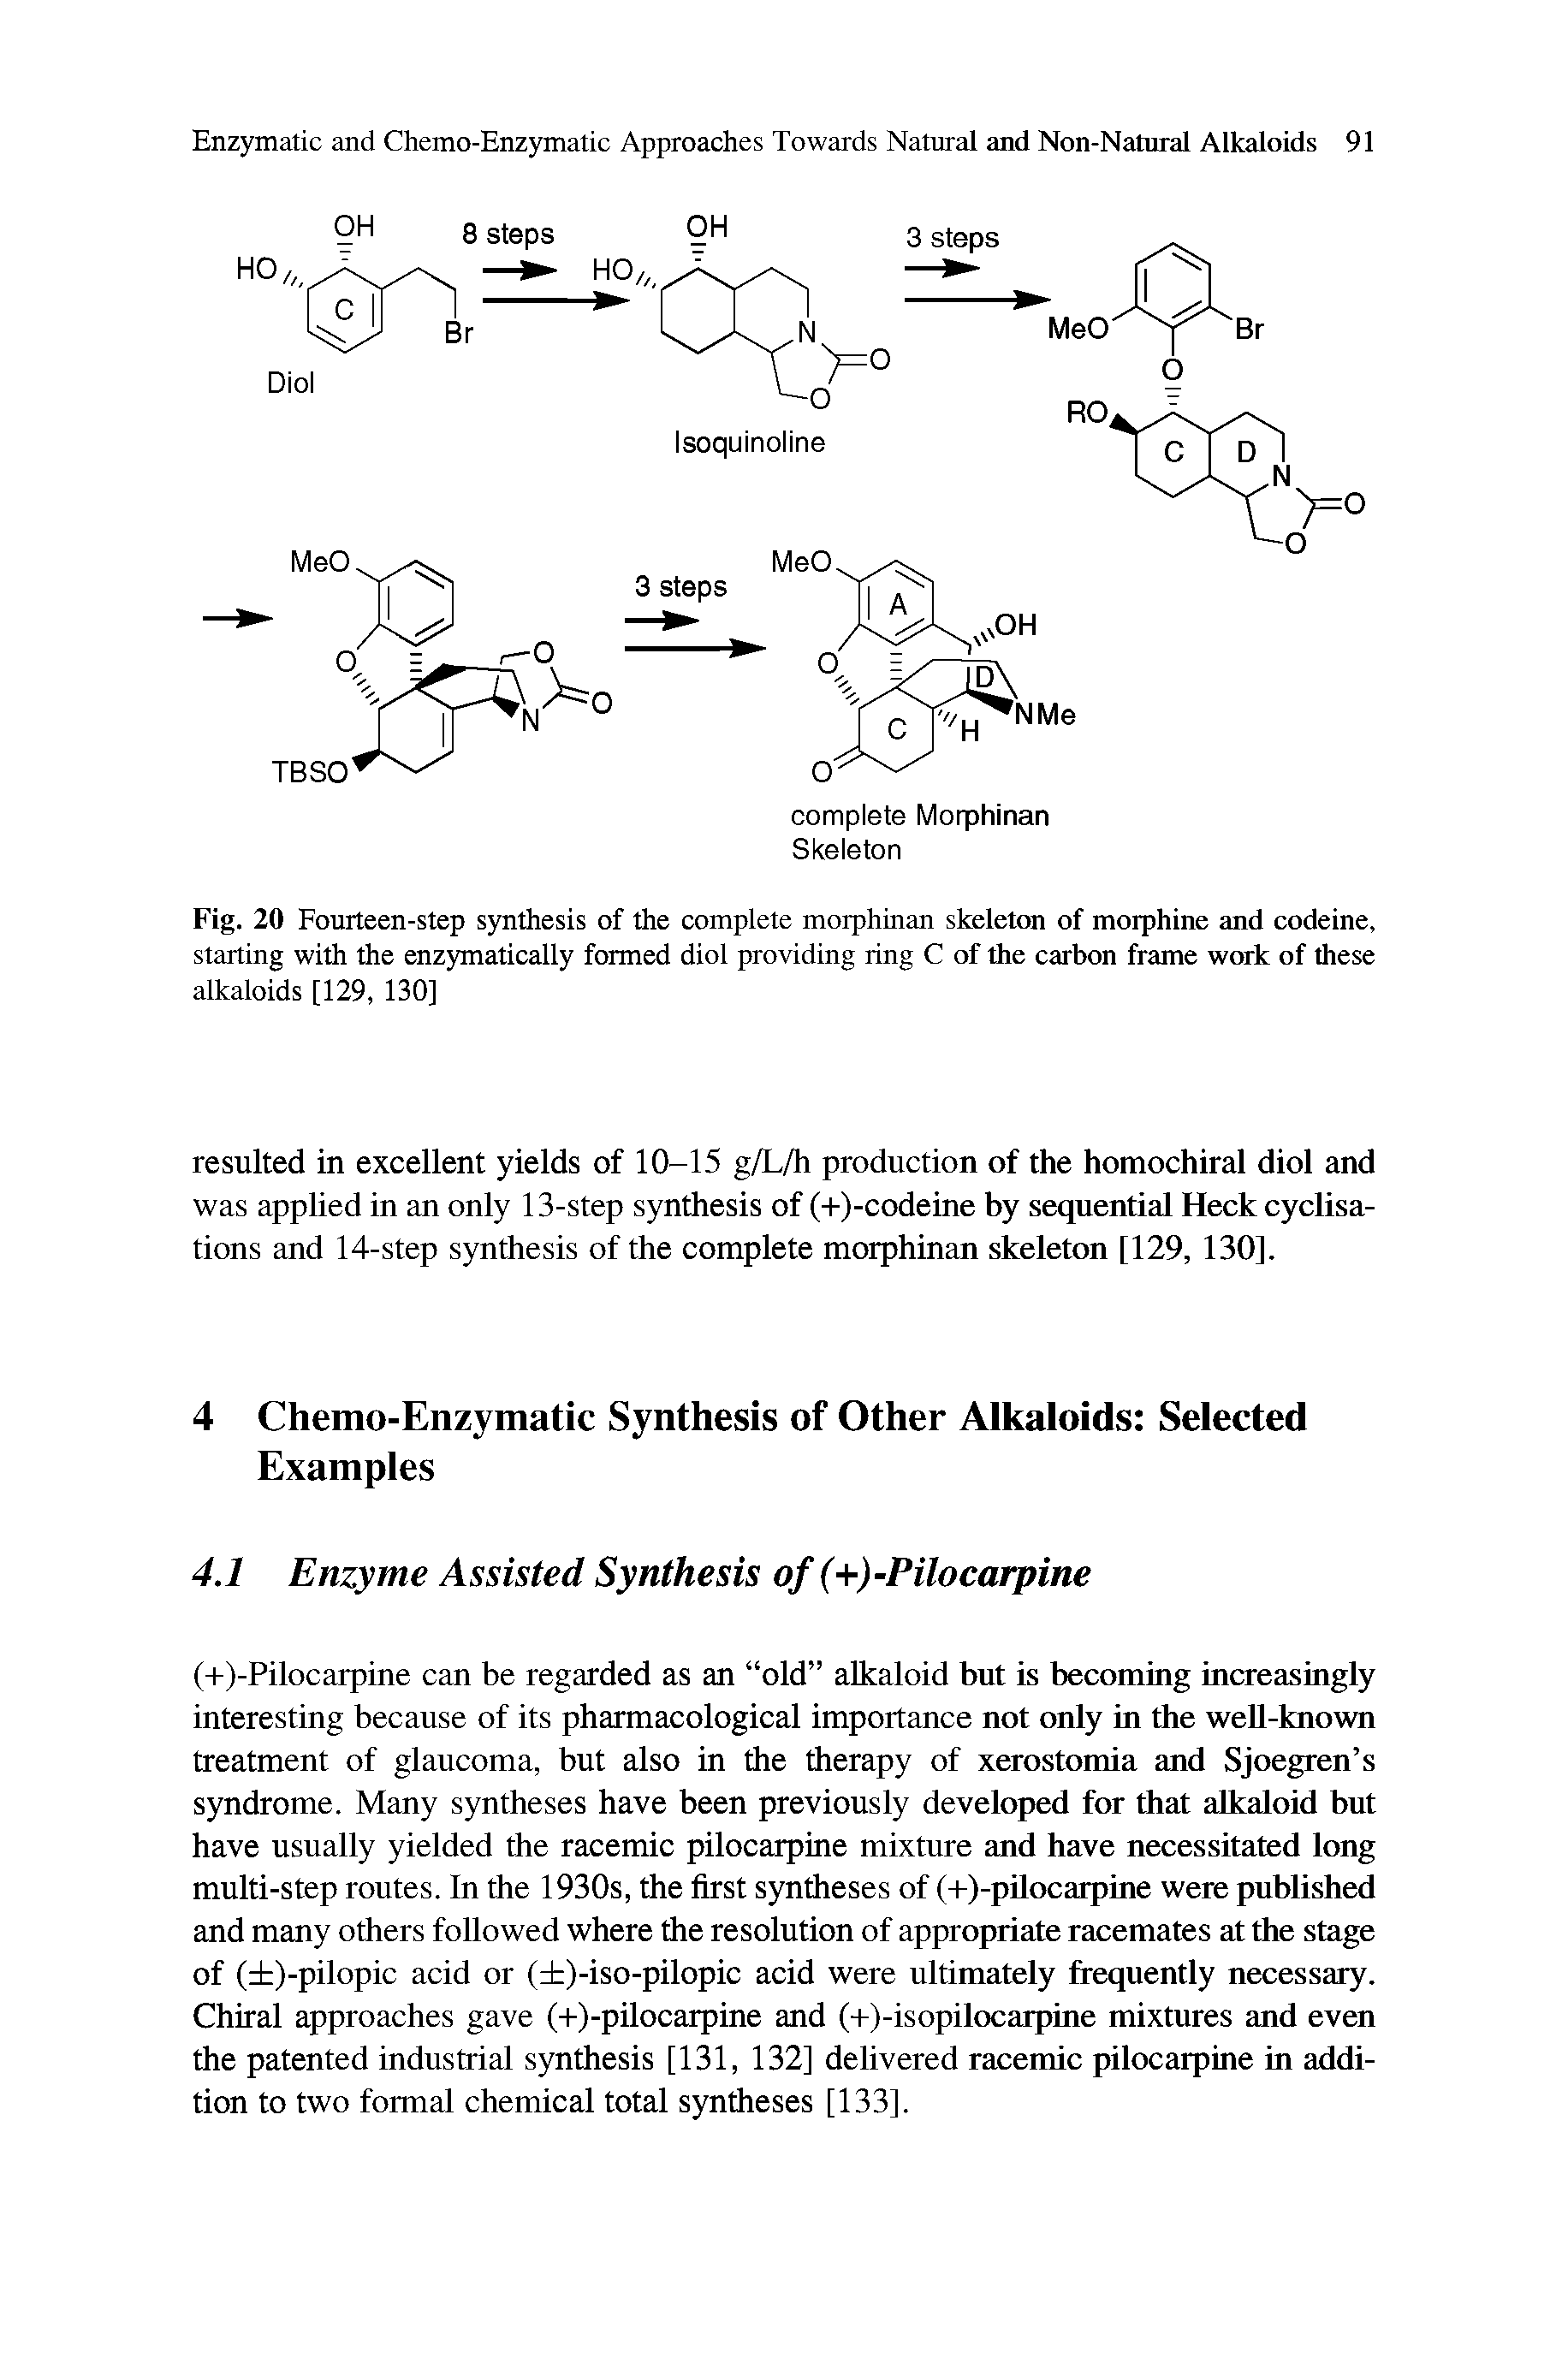 Fig. 20 Fourteen-step synthesis of the complete morphinan skeleton of morphine and codeine, starting with the enzymatically formed diol providing ring C of the carbon frame work of these alkaloids [129, 130]...